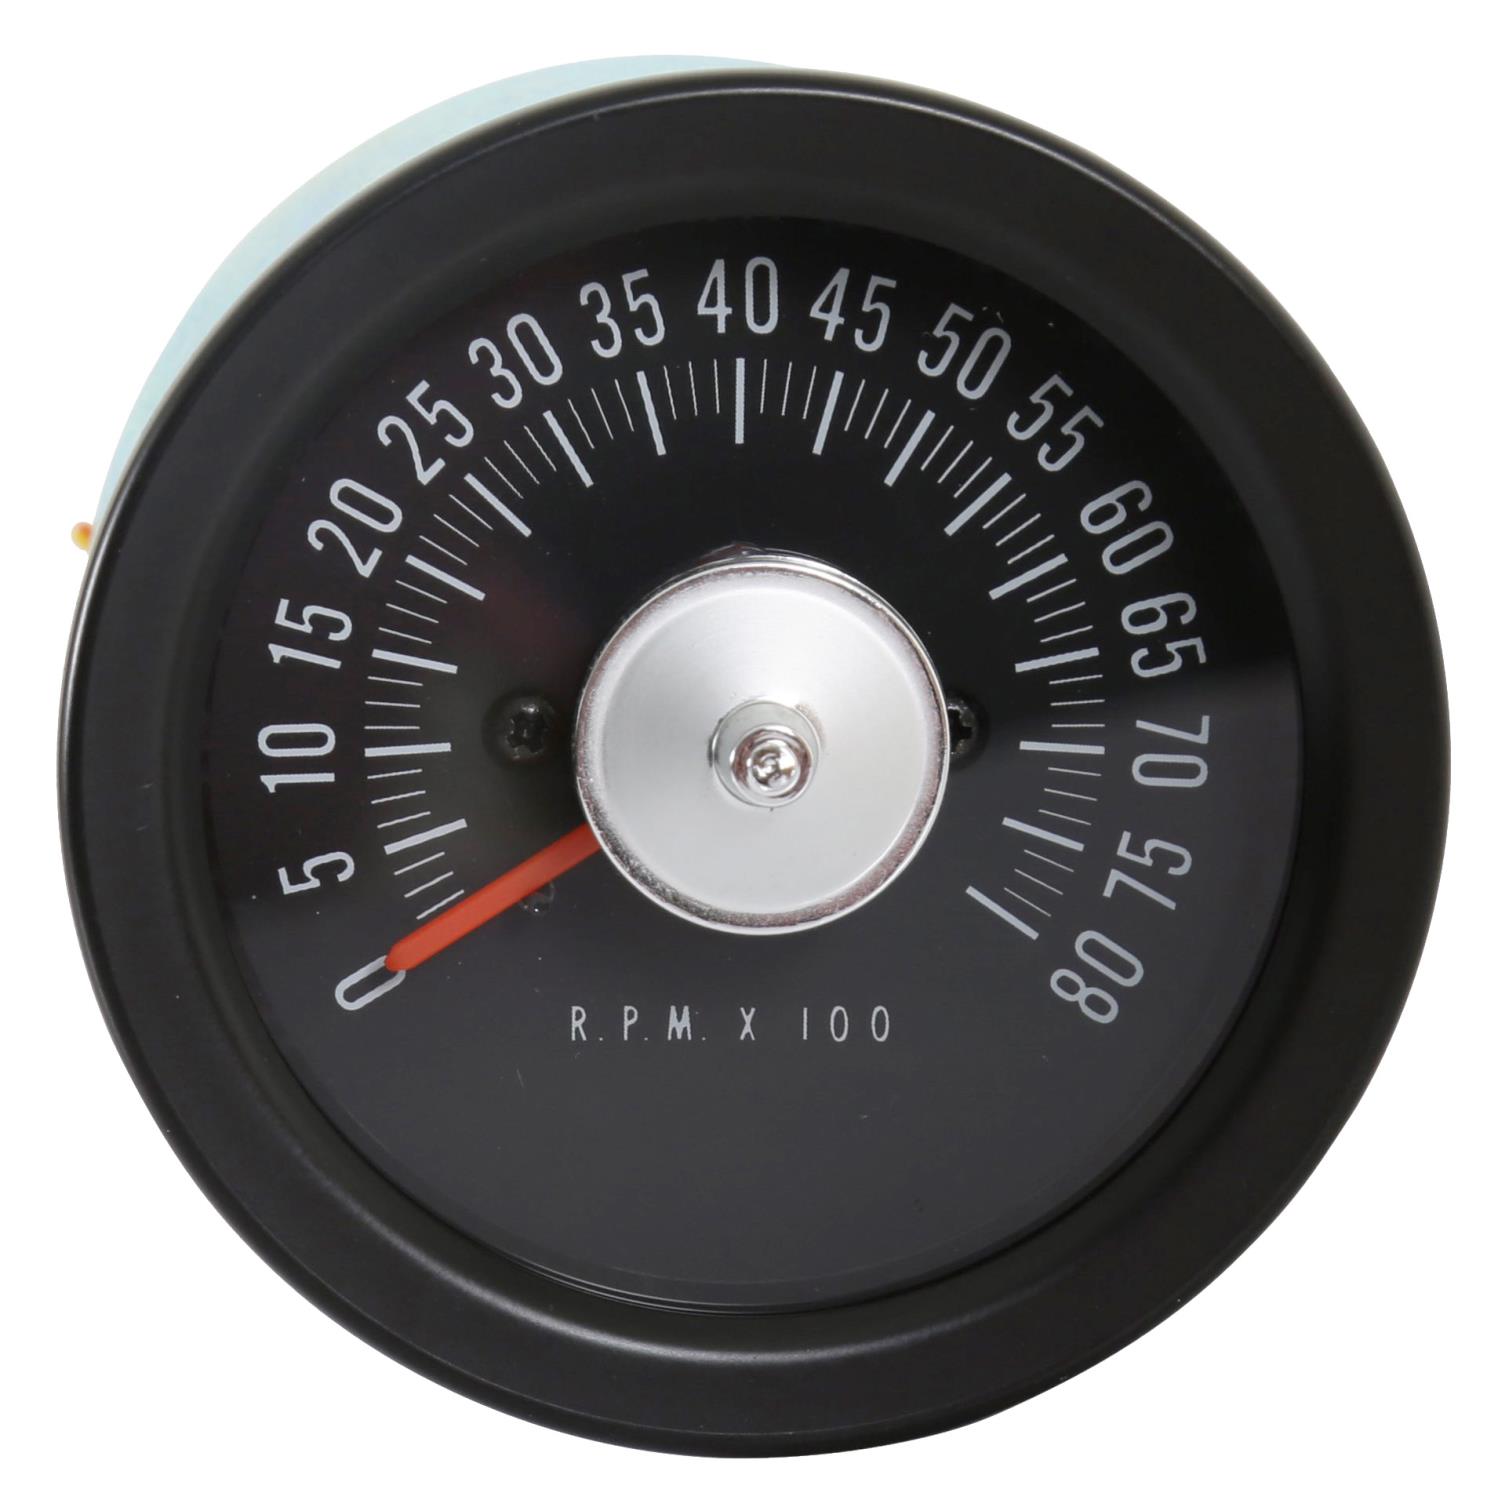 In-Dash Tachometer Conversion Kit for 1967-1968 Ford Mustang [8,000 RPM]